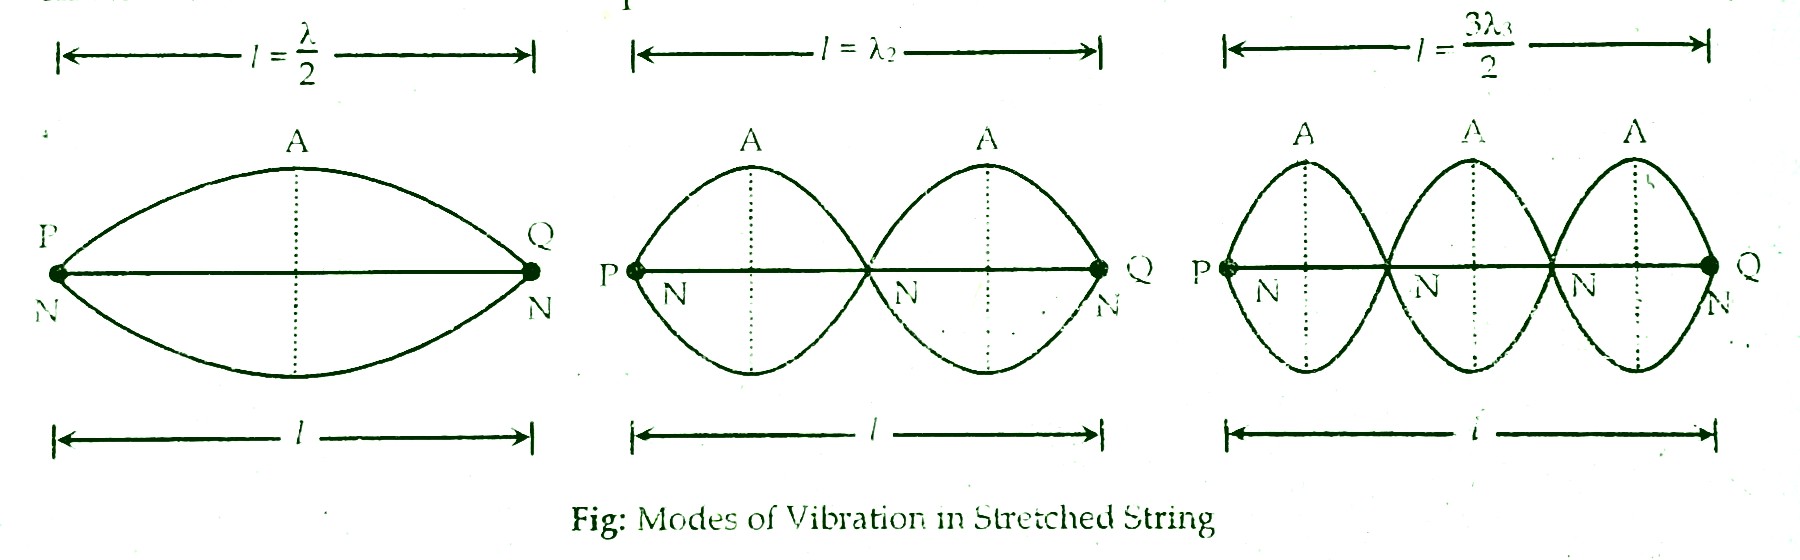 Modes of vibration os stretched string